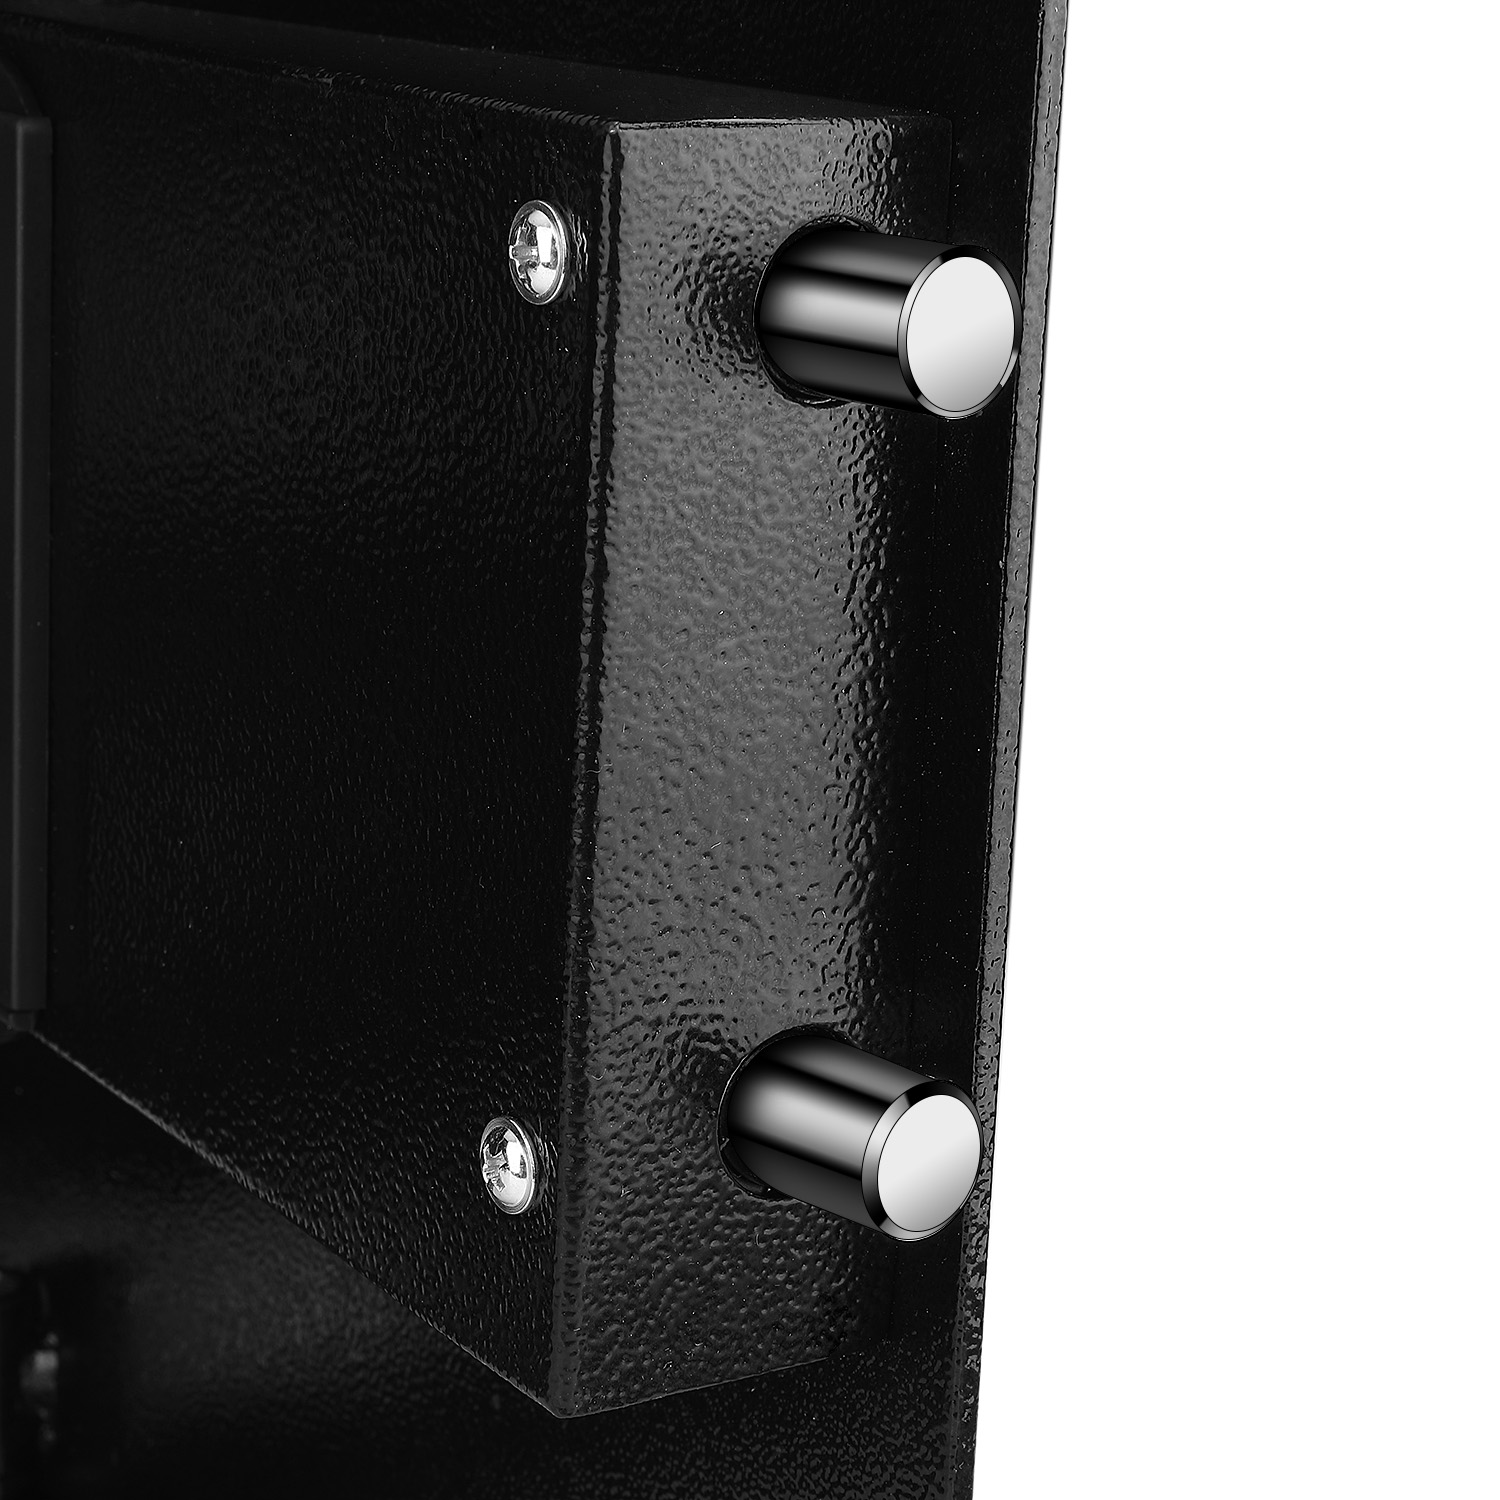 Wall-mounted Key Cabinet Design - Interior mounting holes and wall anchors provided for safe easy wall placement and setup; theft-resistant Locking Mechanism, Packing included screws and wall anchors for easy and stable installation onto the wall